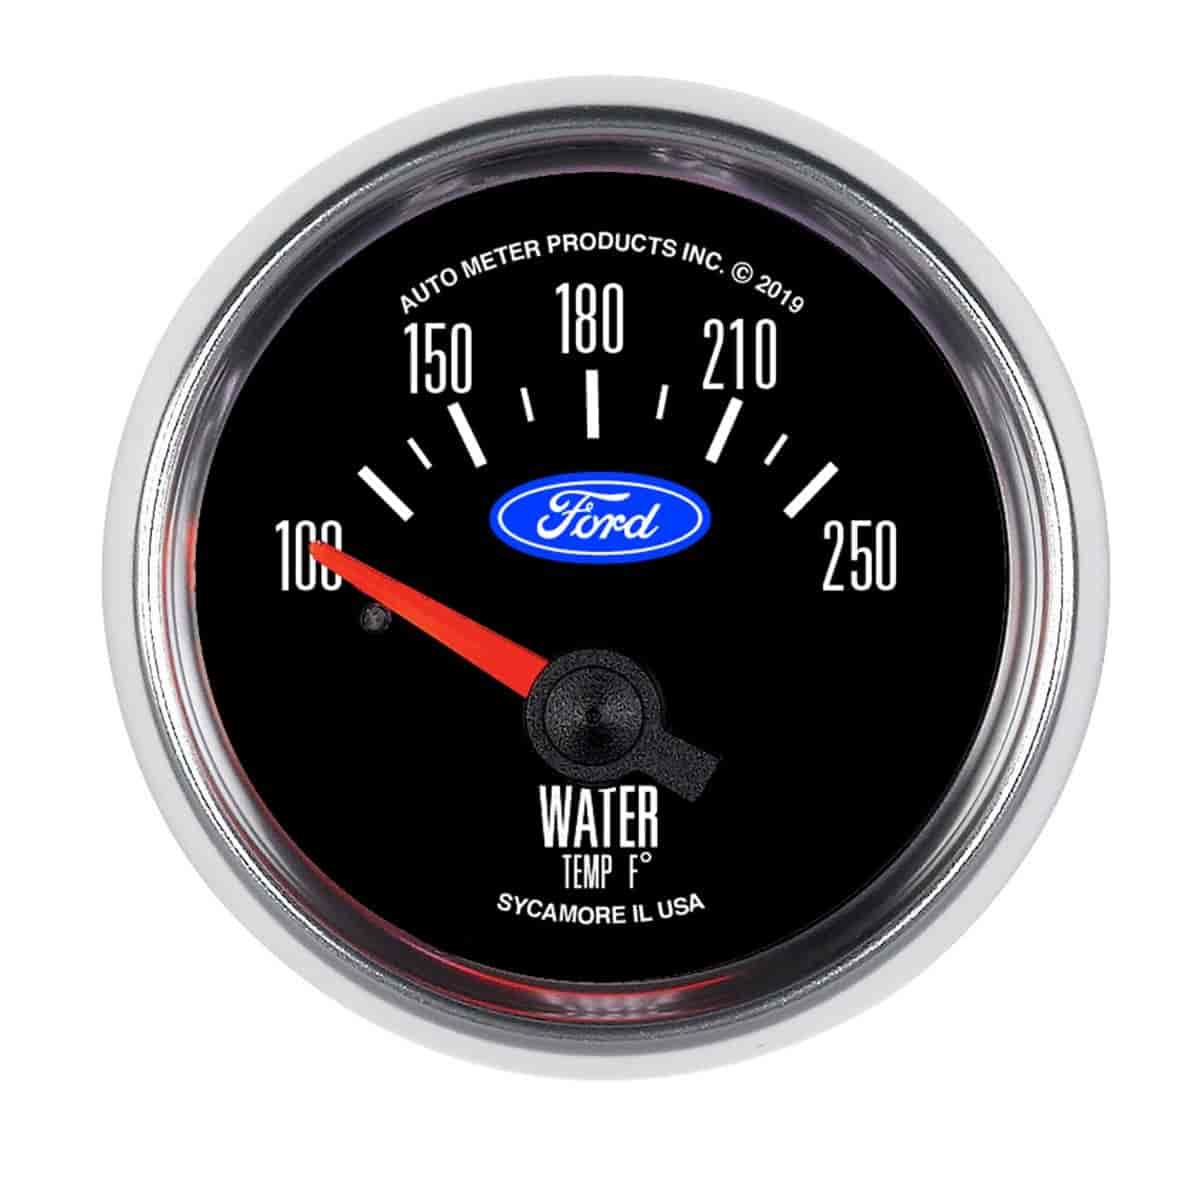 Officially-Licensed Ford Water Temperature Gauge 2 1/16 in.,